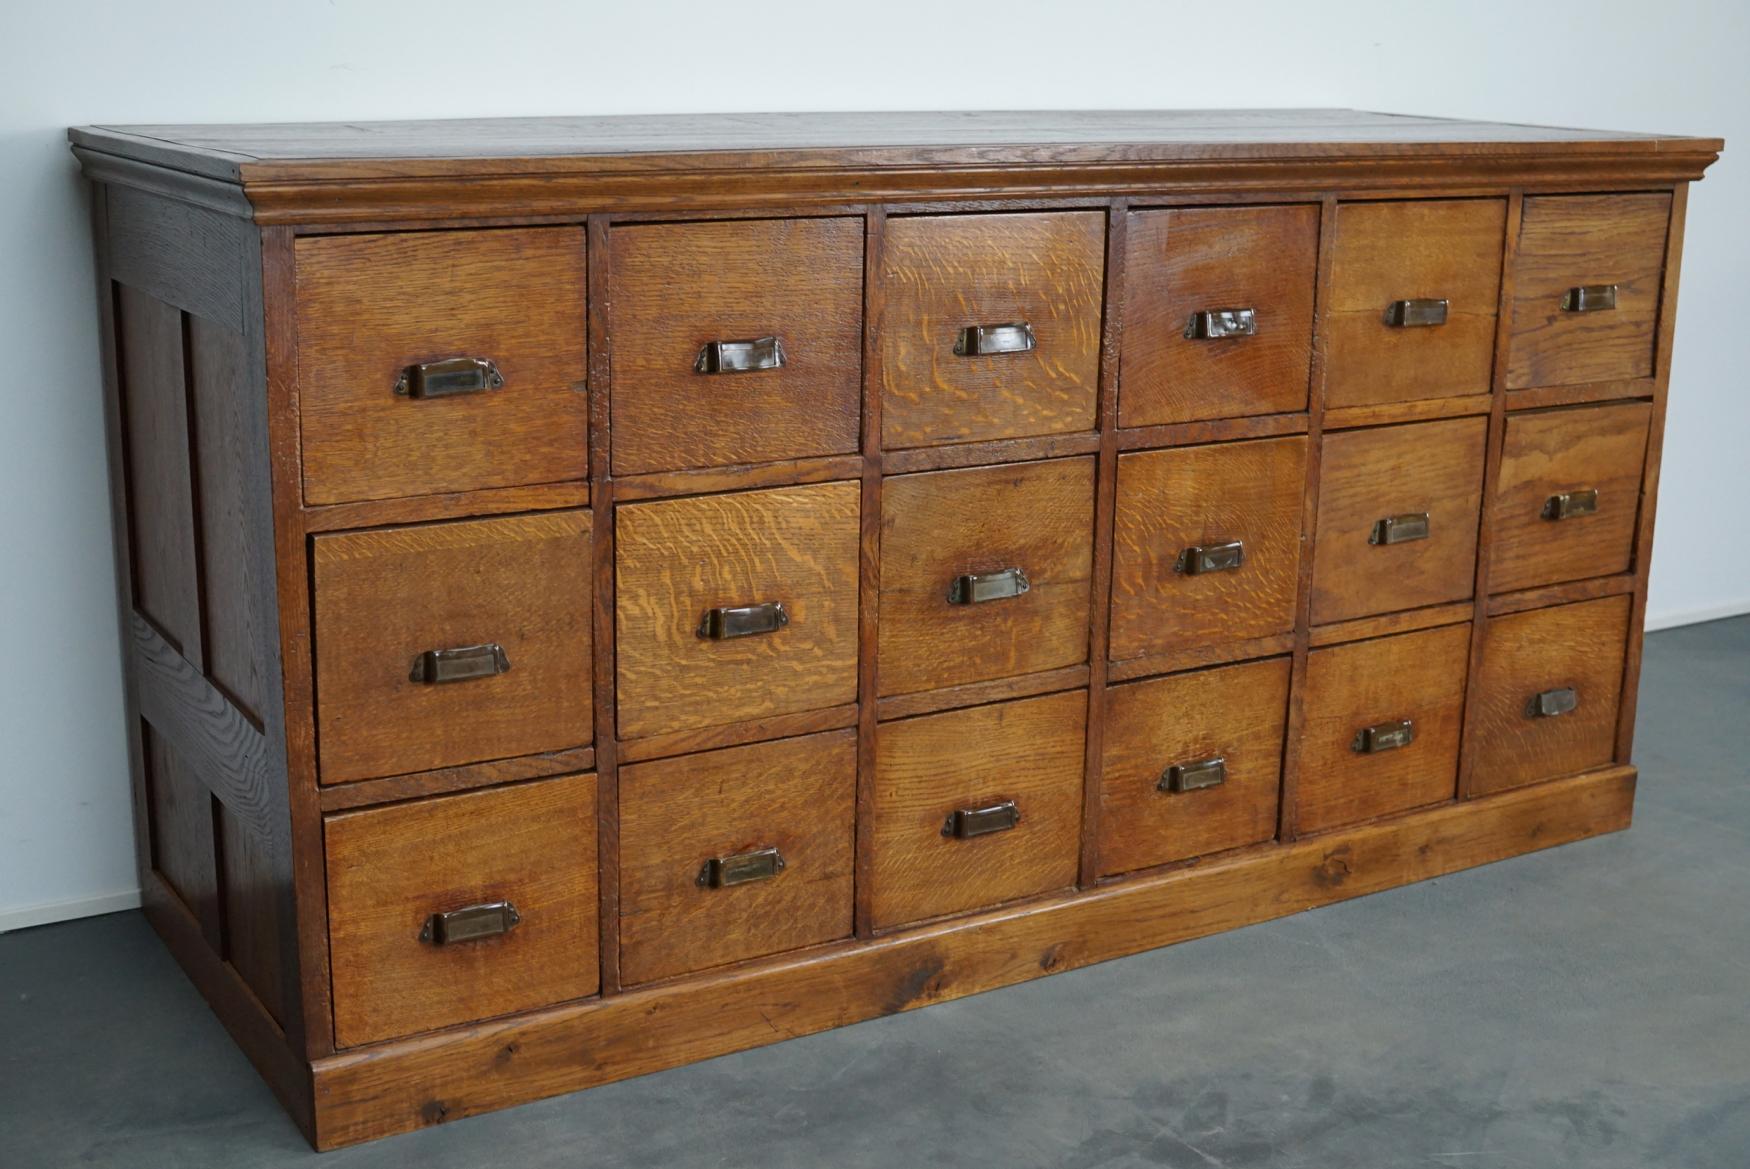 This apothecary / filing cabinet was produced during the 1930s in the Netherlands. This piece features 18 large drawers. The interior dimensions of the drawers are: D x W x H 52 x 24 x 11 / 20 cm. They were used as filing cabinets in the town hall